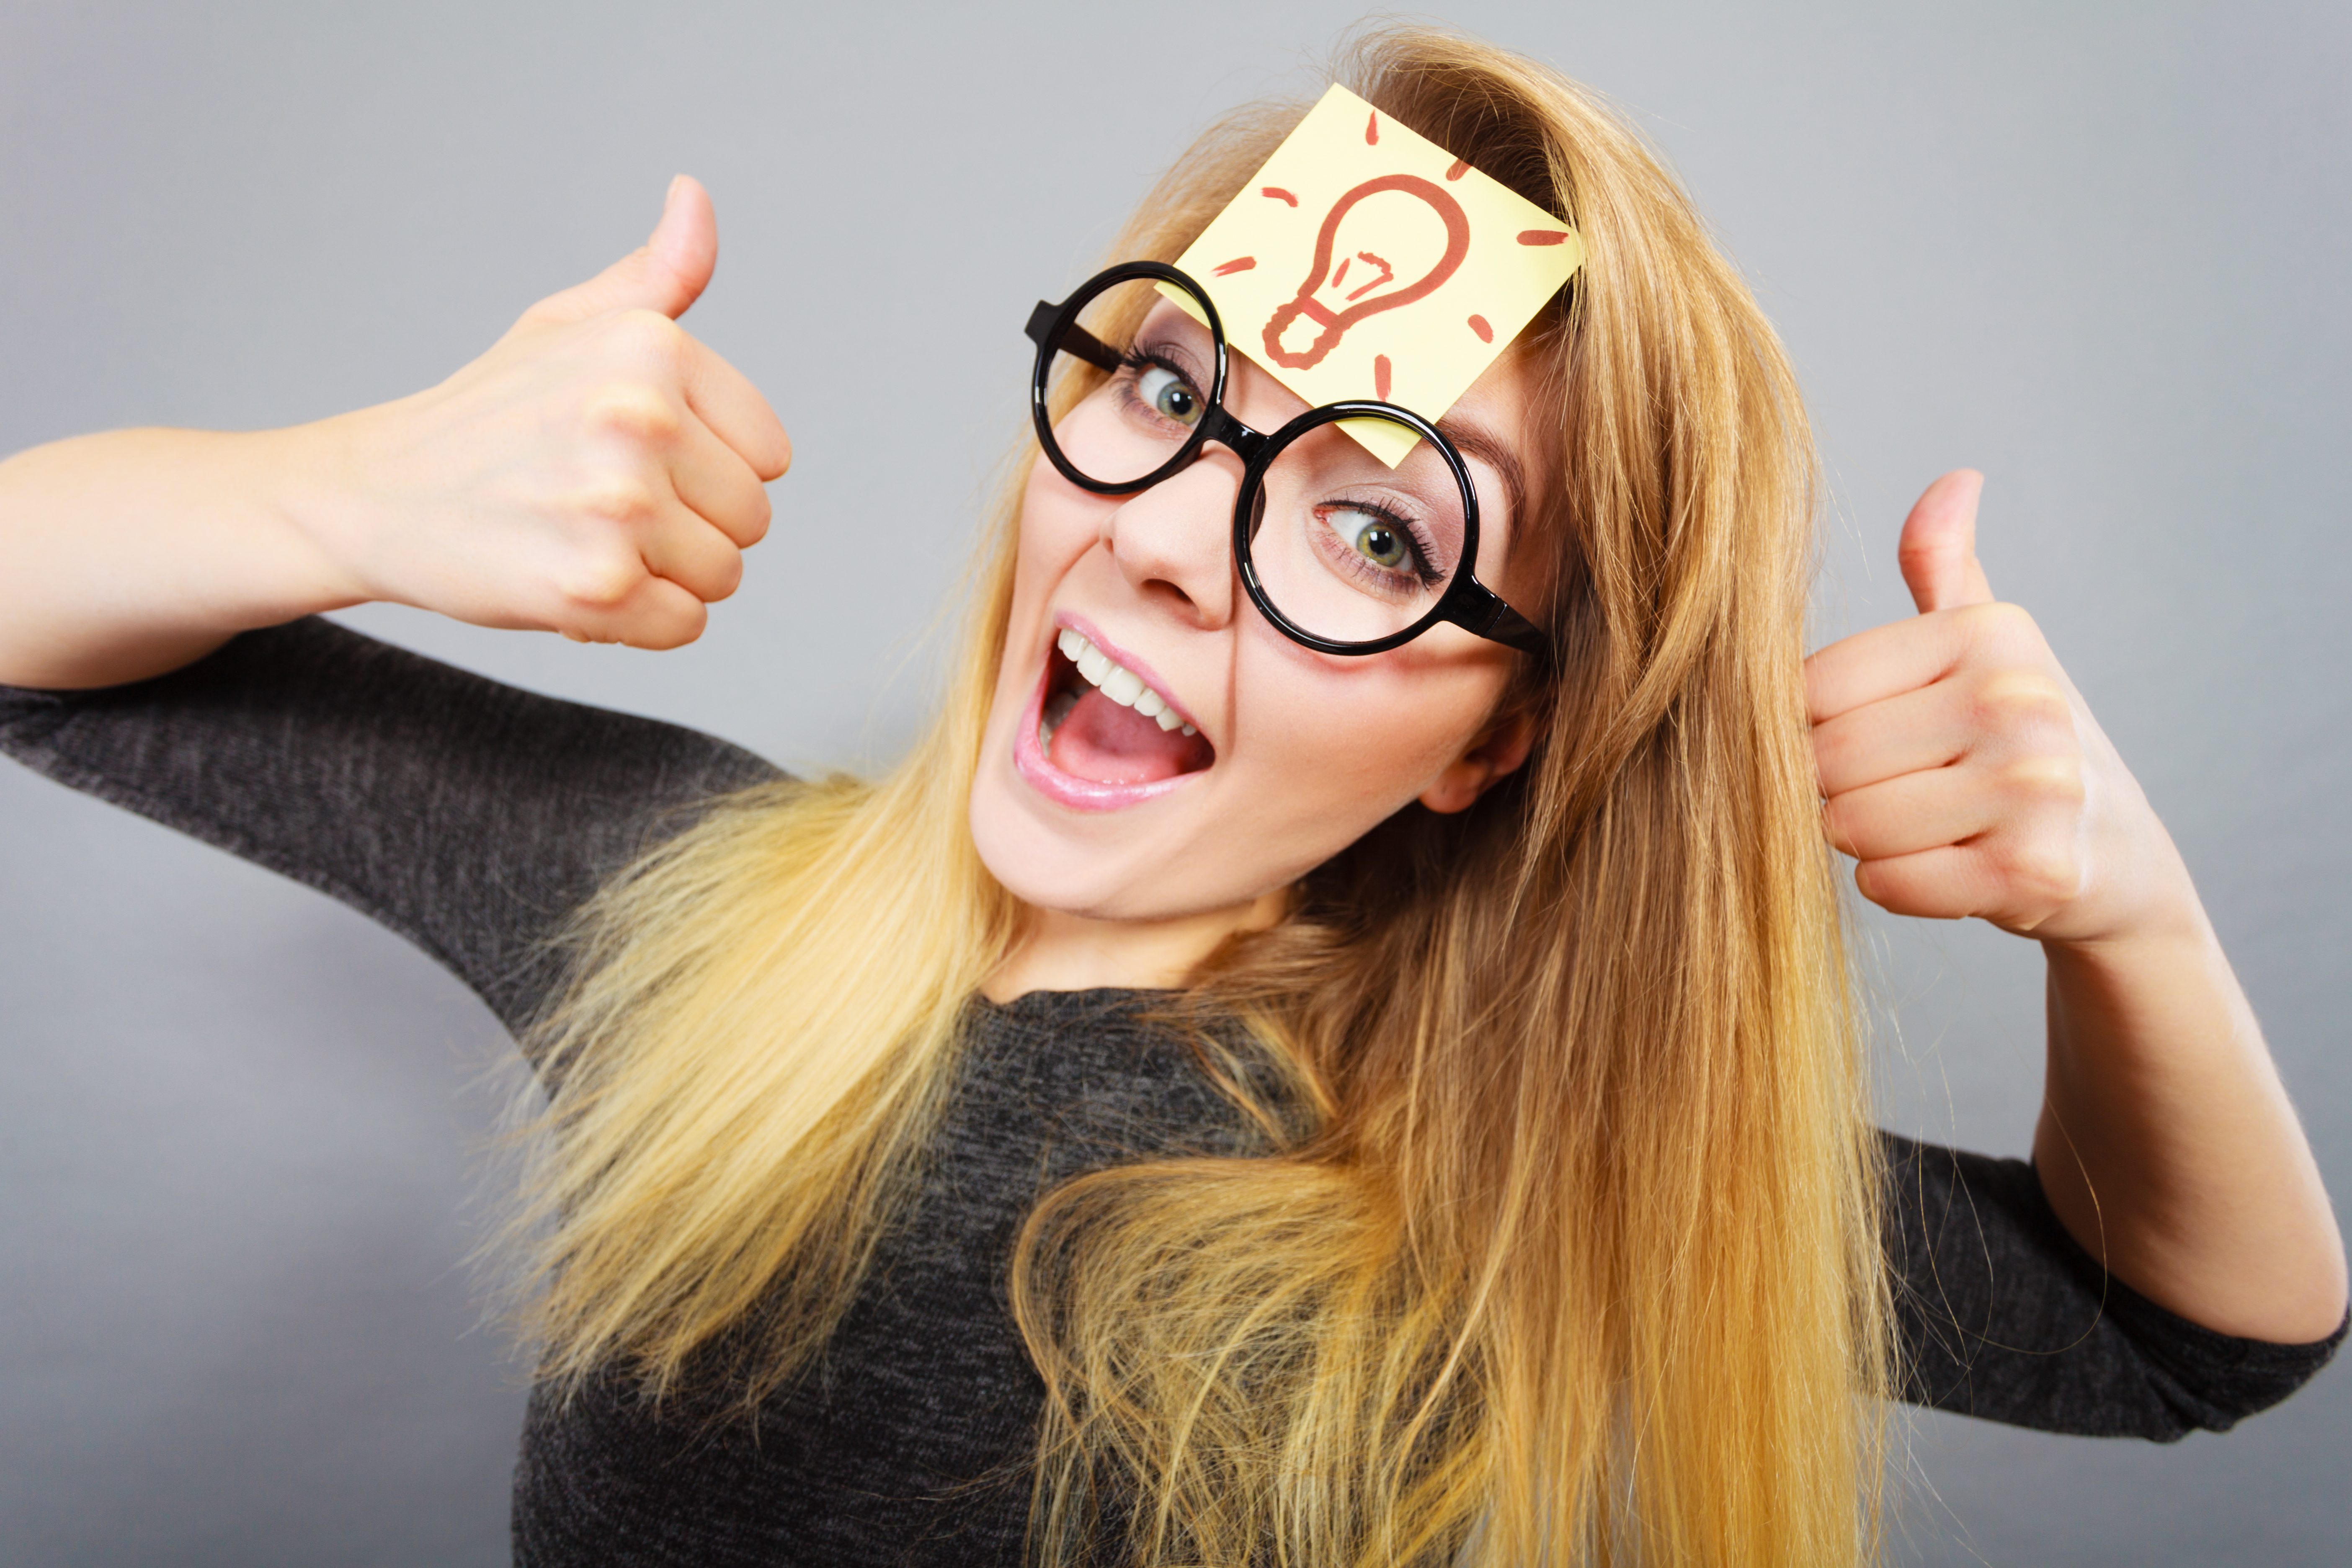 Woman with Post It note on forehead, giving thumbs up